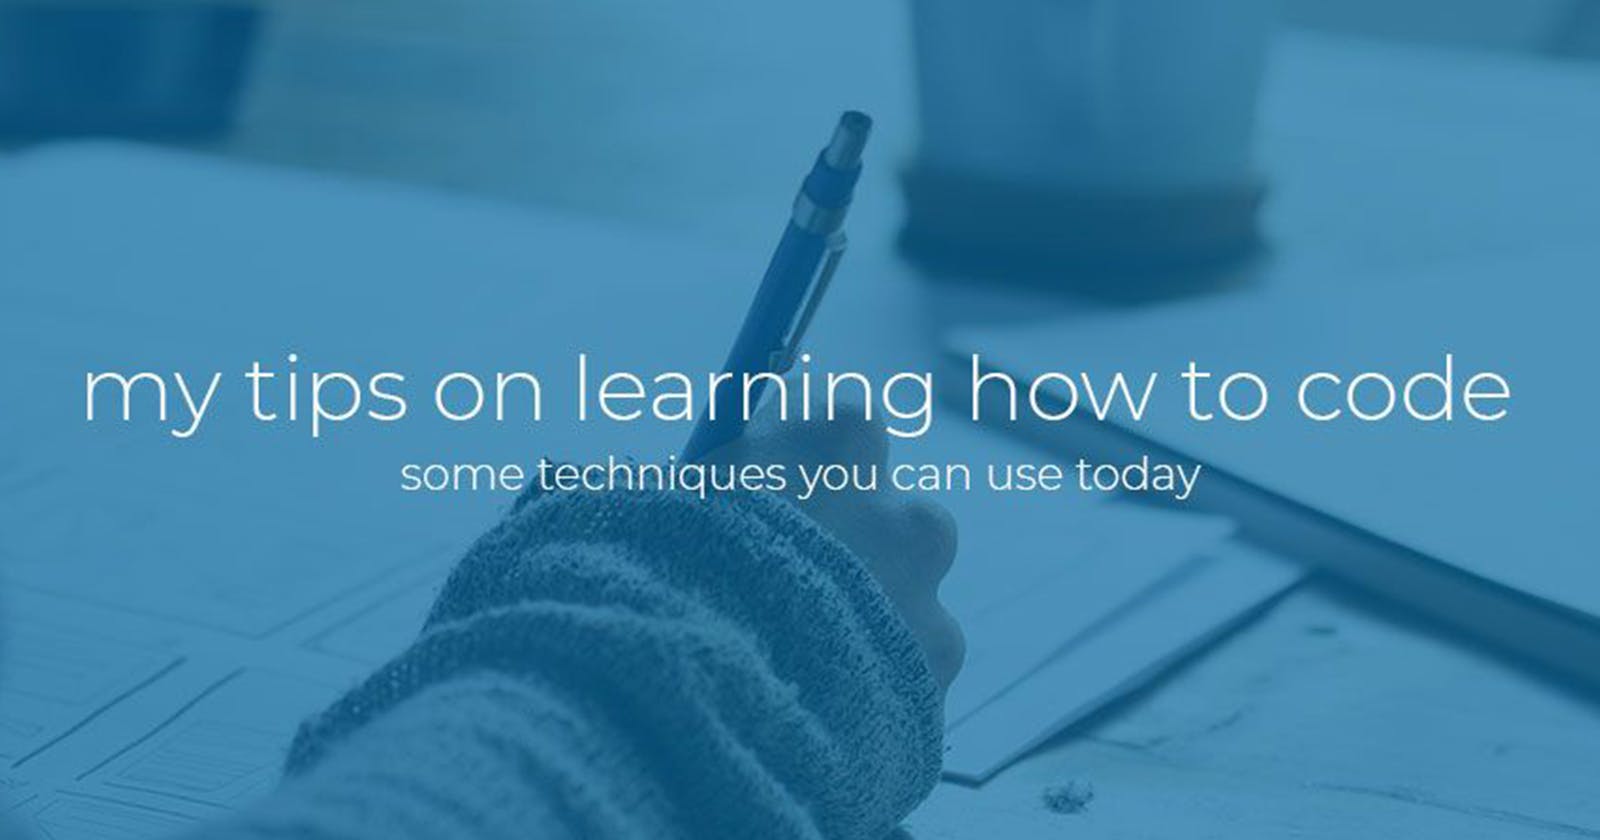 My tips on learning how to code.